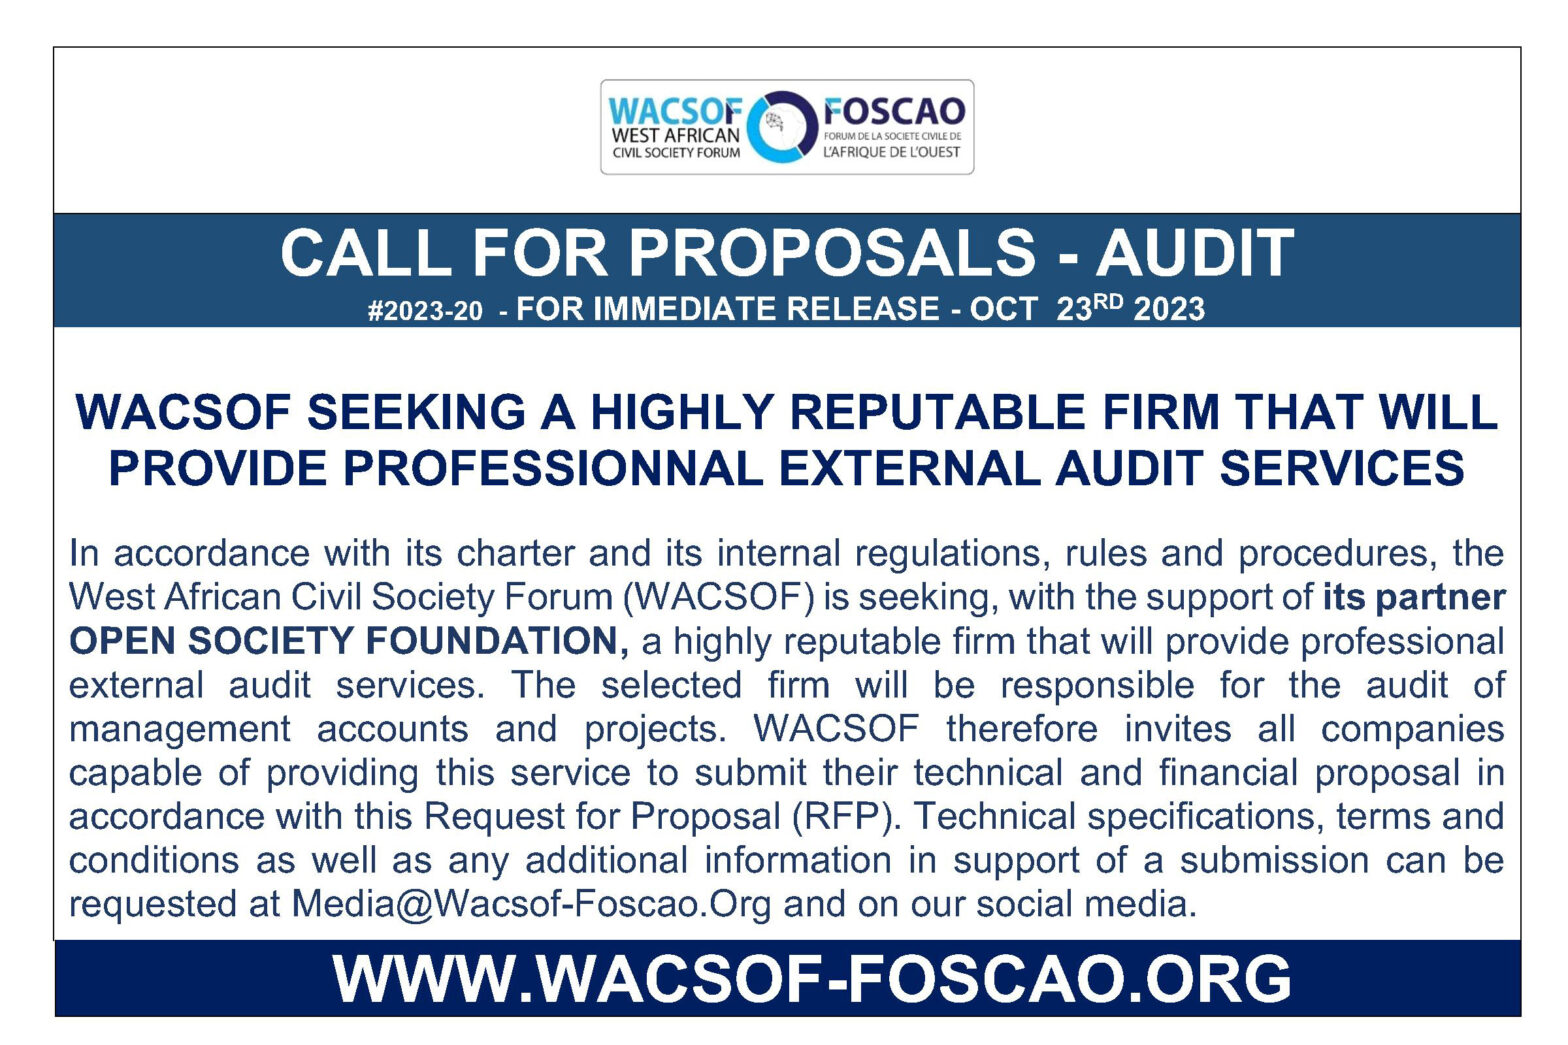 WACSOF SEEKING A HIGHLY REPUTABLE FIRM THAT WILL PROVIDE PROFESSIONNAL EXTERNAL AUDIT SERVICES